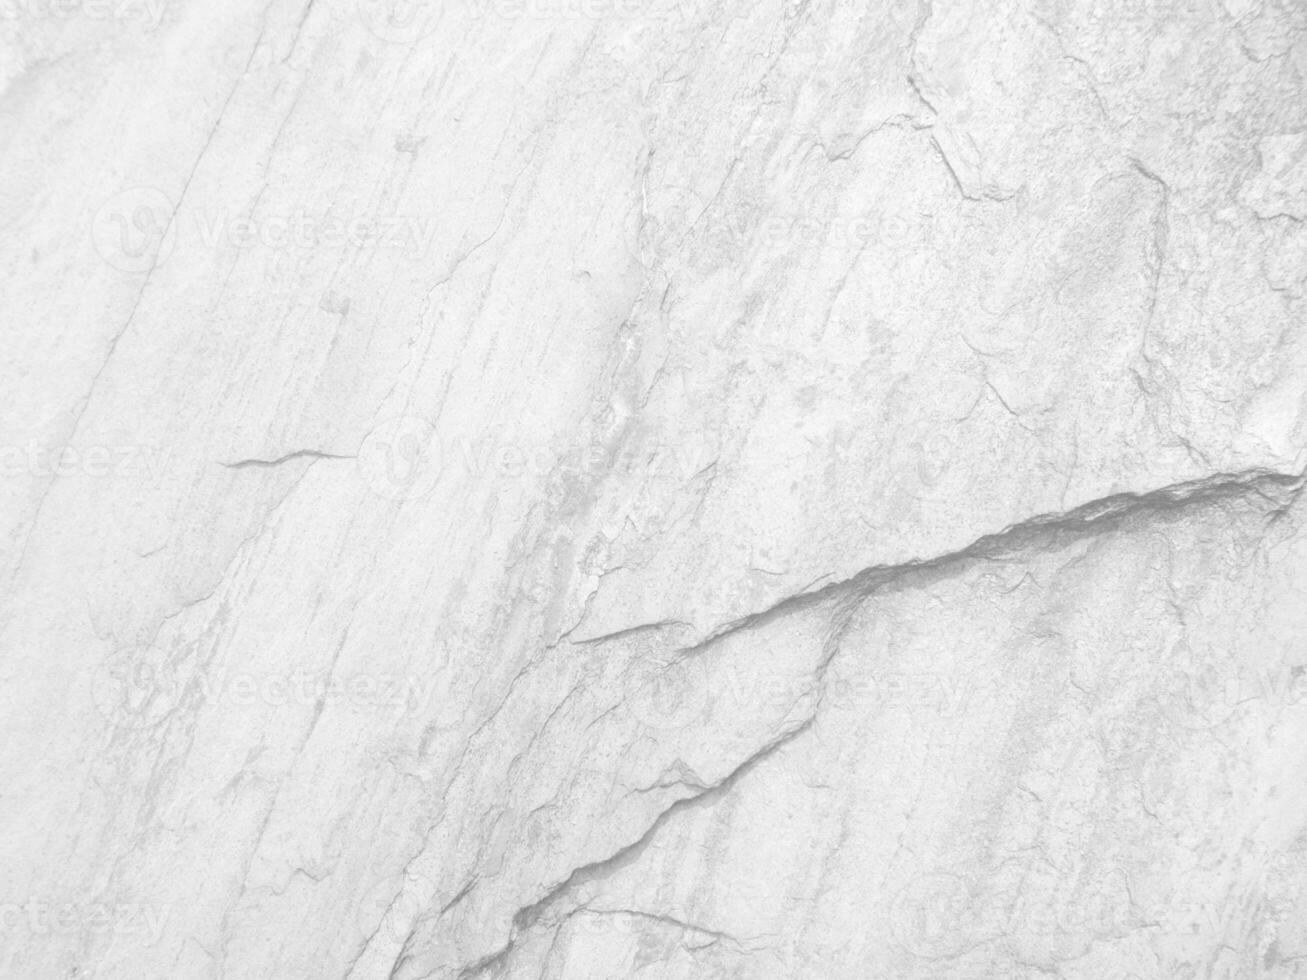 Surface of the white stone texture rough, gray-white tone. Use this for wallpaper or background image. There is a blank space for text. photo